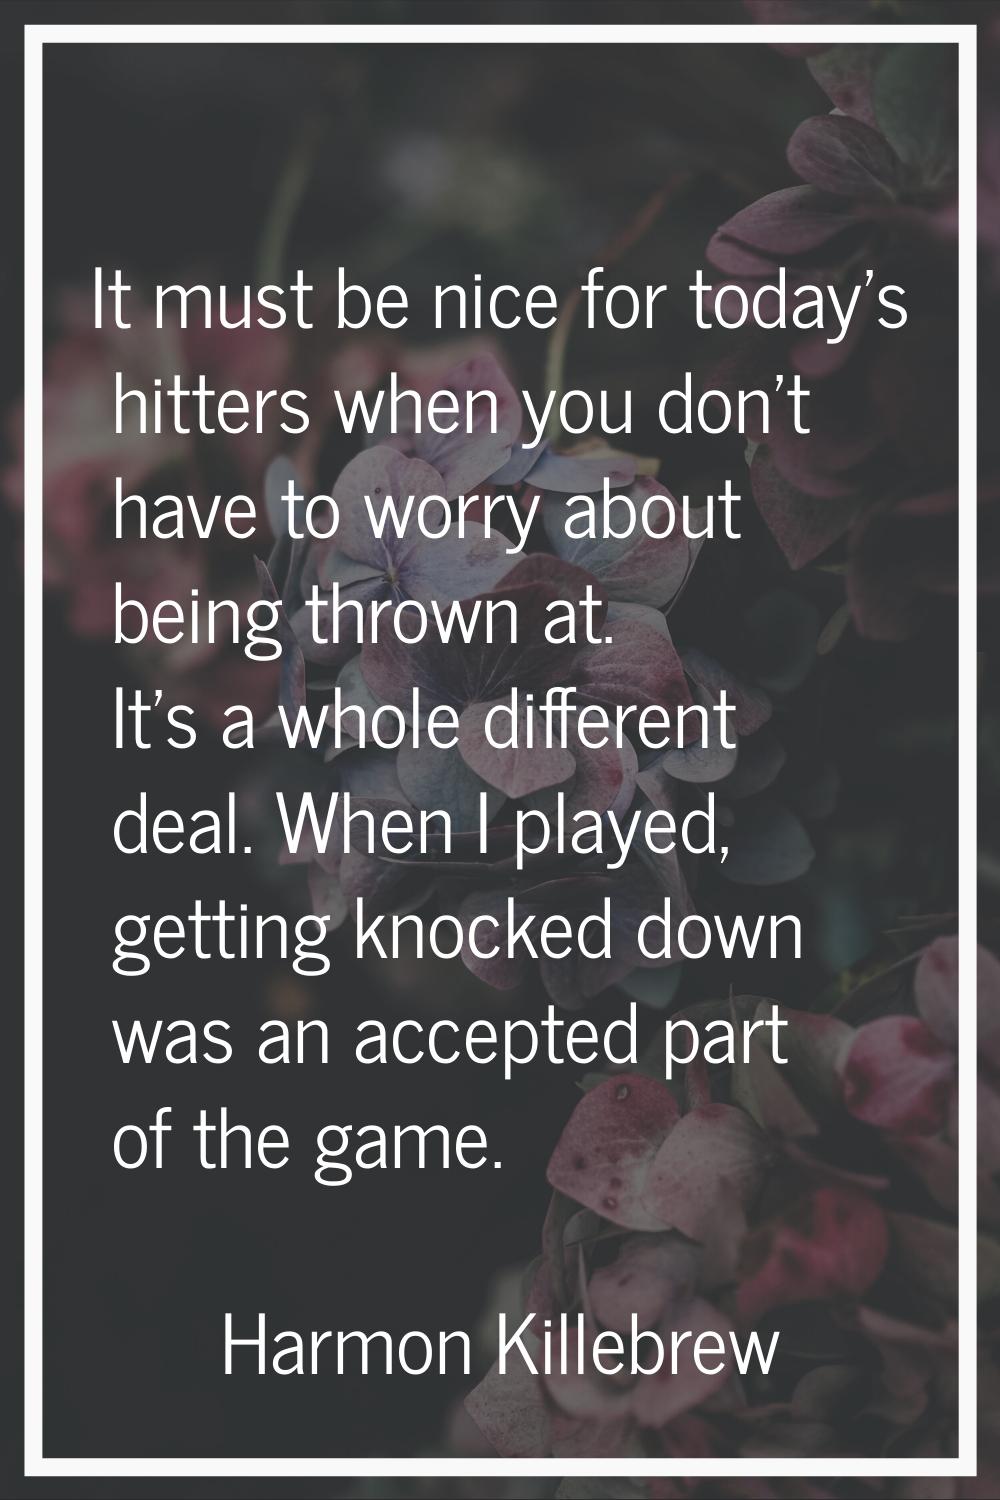 It must be nice for today's hitters when you don't have to worry about being thrown at. It's a whol